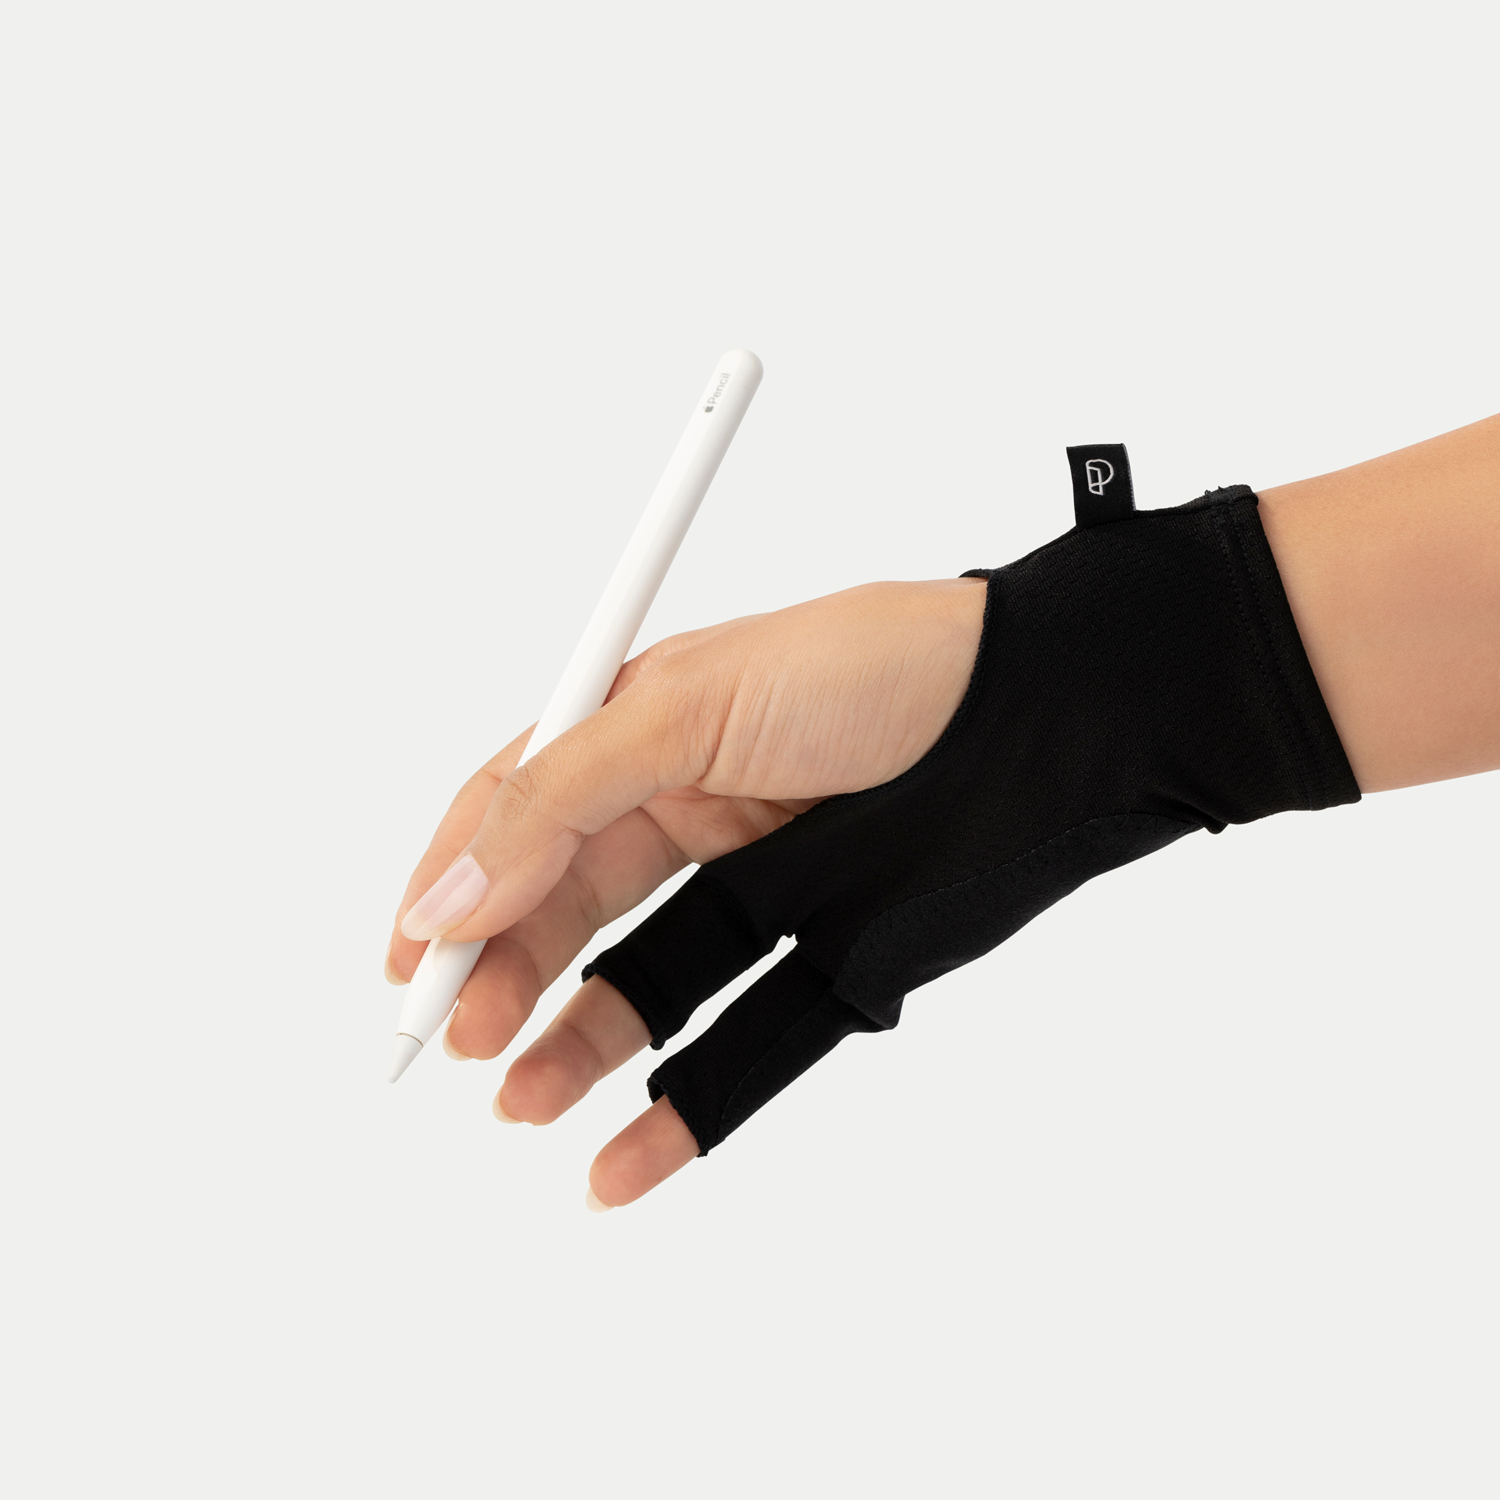 Paperlike's Drawing Glove made with breathable fabric to keep your hands cool and comfortable.